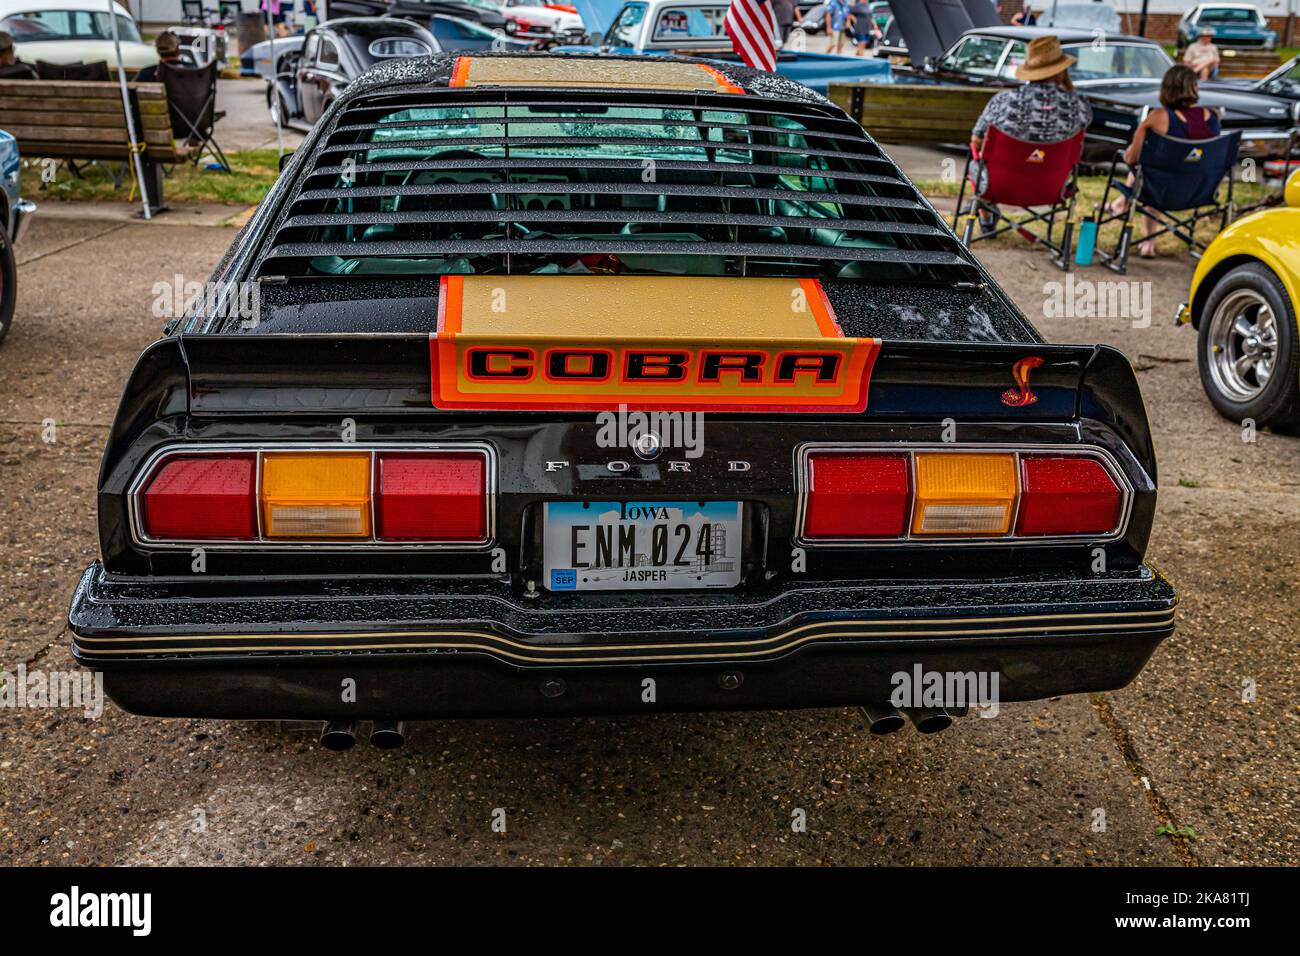 Des Moines, IA - July 01, 2022: High perspective rear view of a 1978 Ford Mustang Cobra II at a local car show. Stock Photo